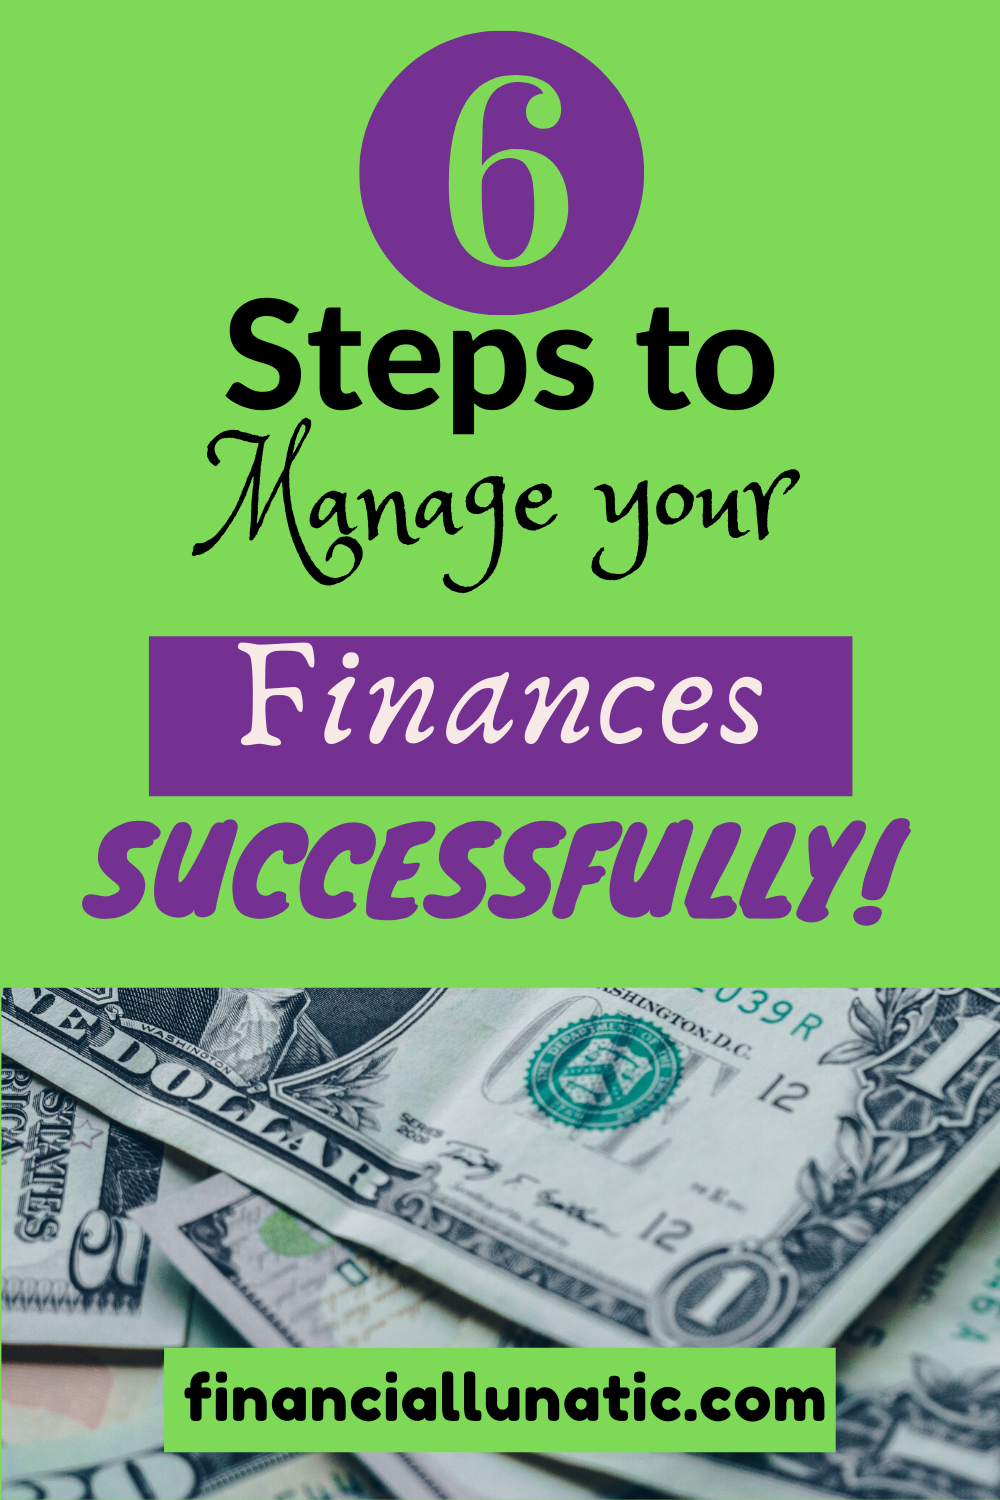 6 Steps to Manage your Finances Successfully